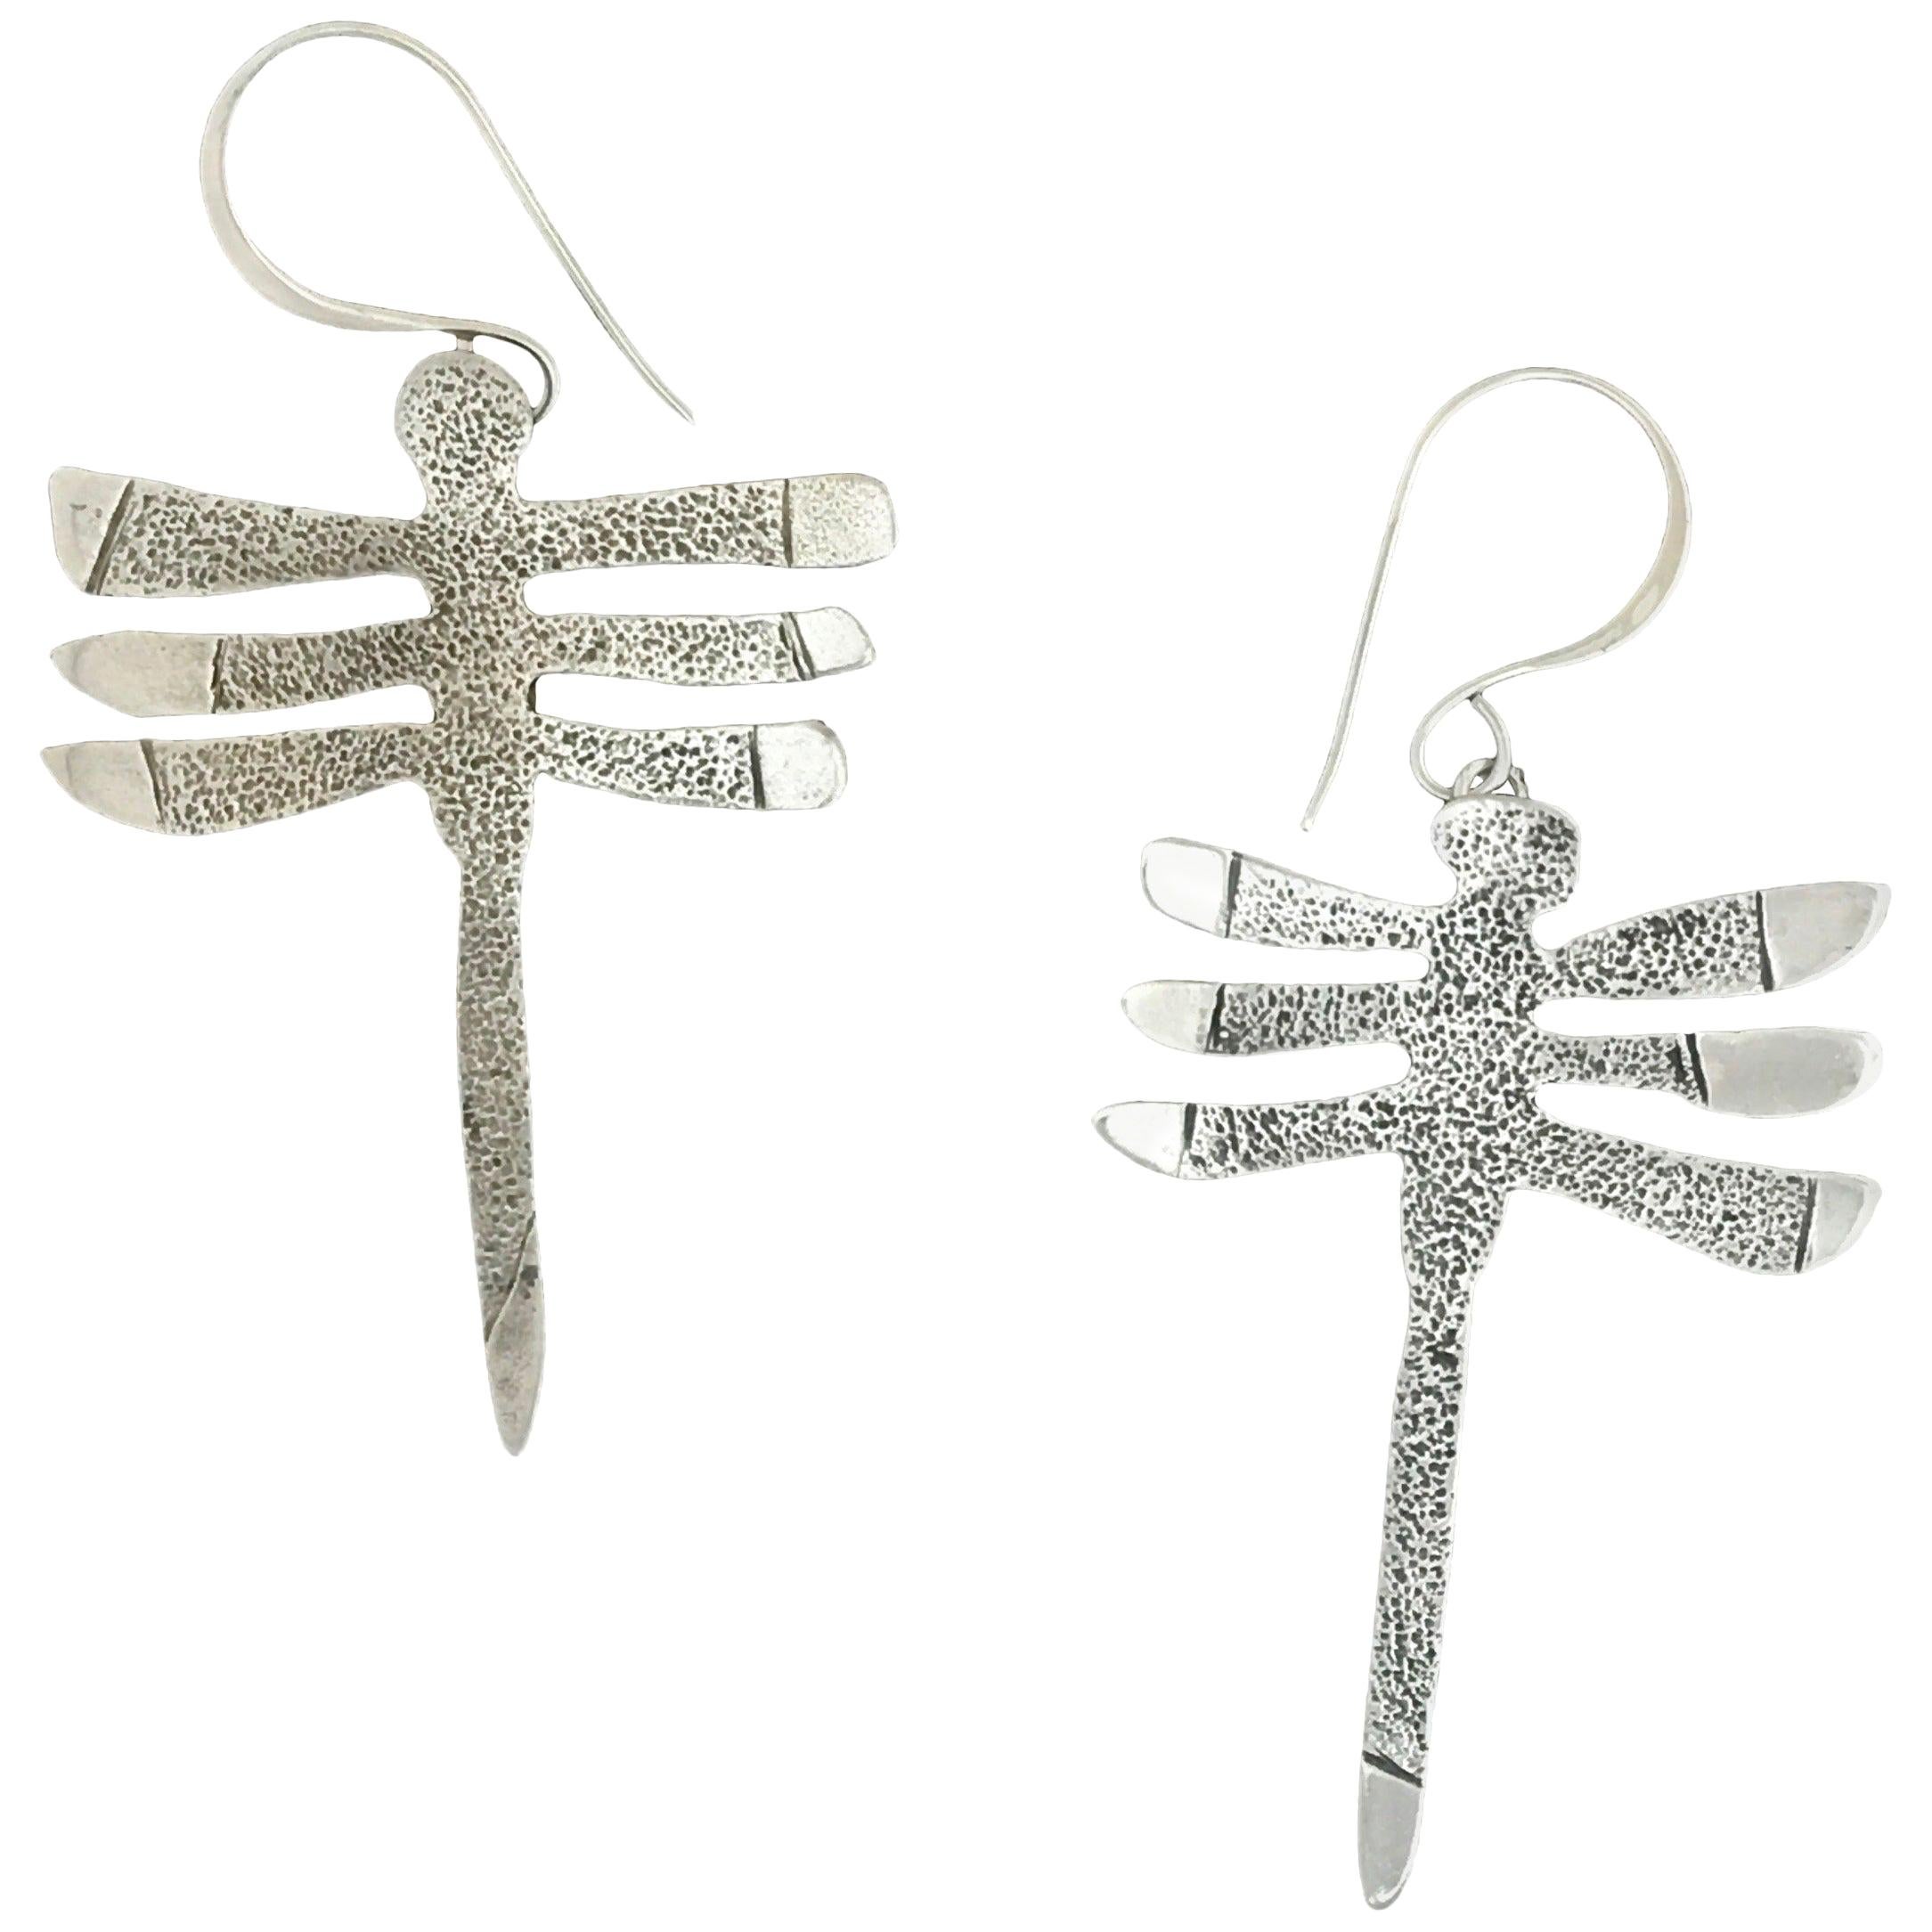 My Protectors, three-winged dragonfly earrings silver Navajo Melanie Yazzie

Melanie A. Yazzie (Navajo-Diné) is a highly regarded multimedia artist known for her printmaking, paintings, sculpture, and jewelry designs.

She has exhibited, lectured,